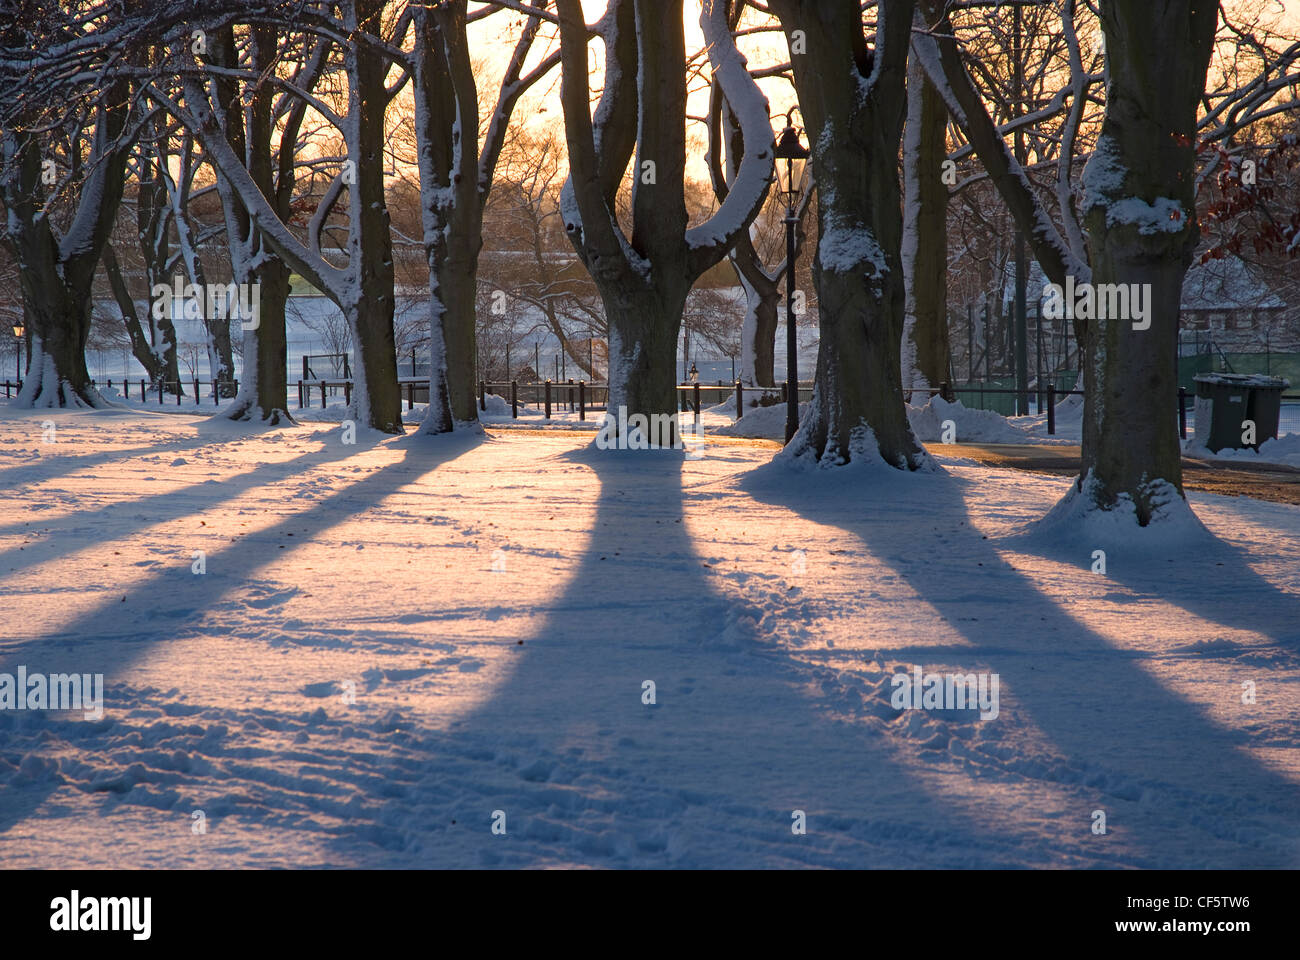 Long shadows from trees over snow covered ground in low evening light. Stock Photo